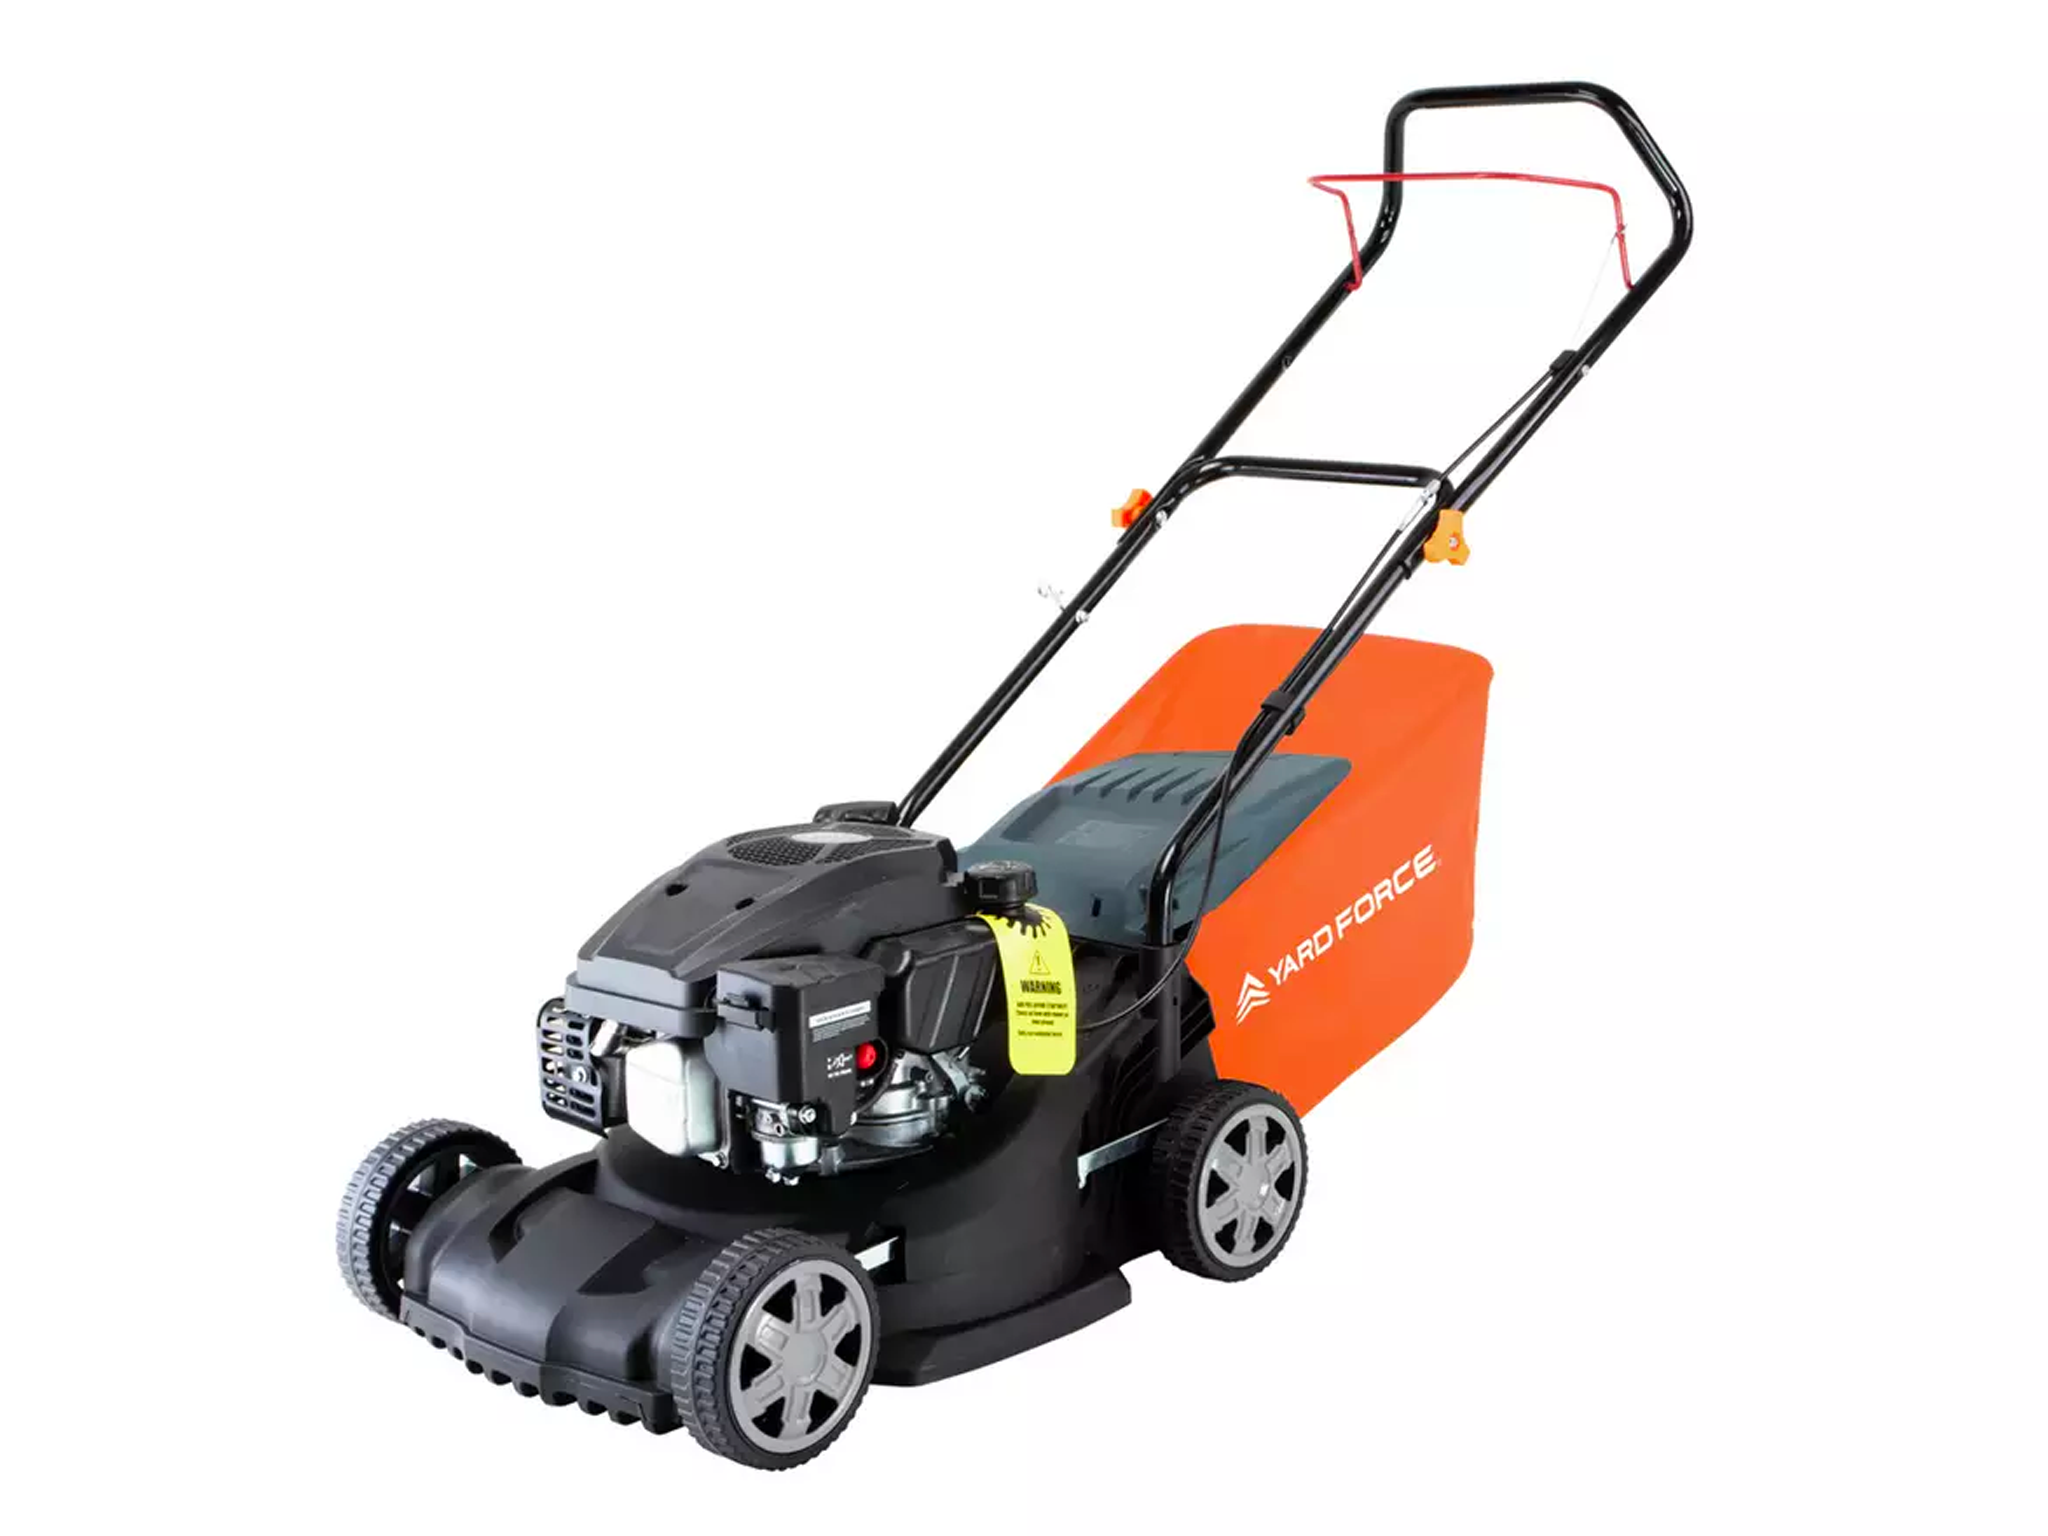 Yard-force-lawn-mowers-indybest